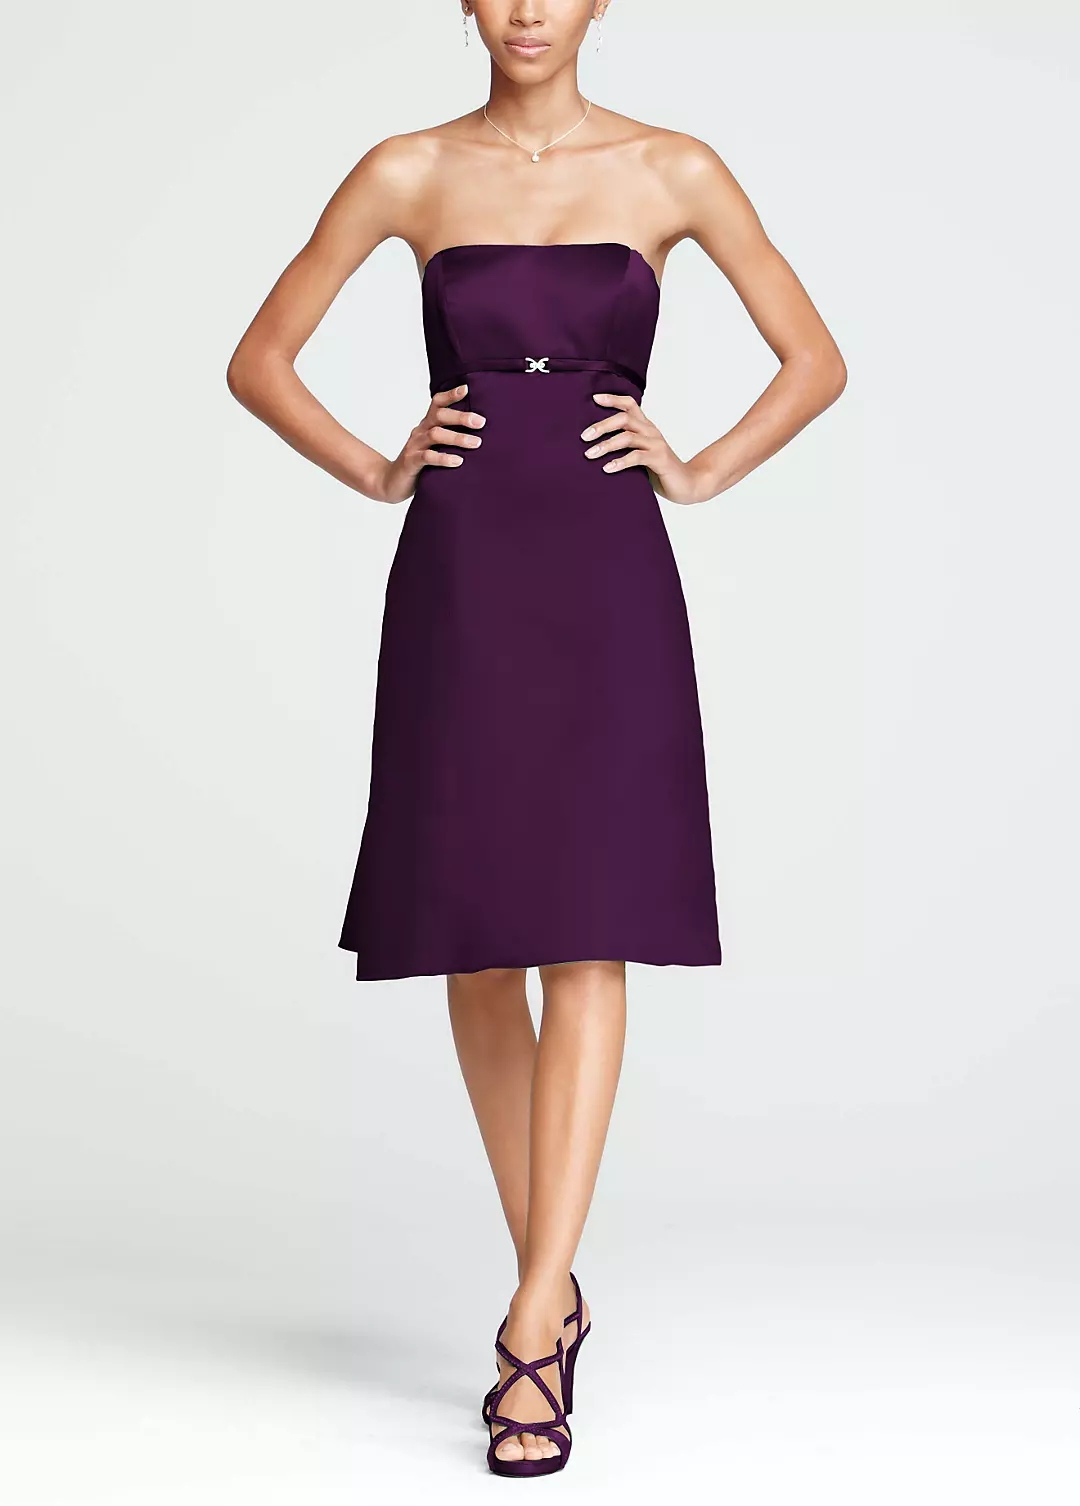 Strapless Satin Dress with Pleated Back and Brooch Image